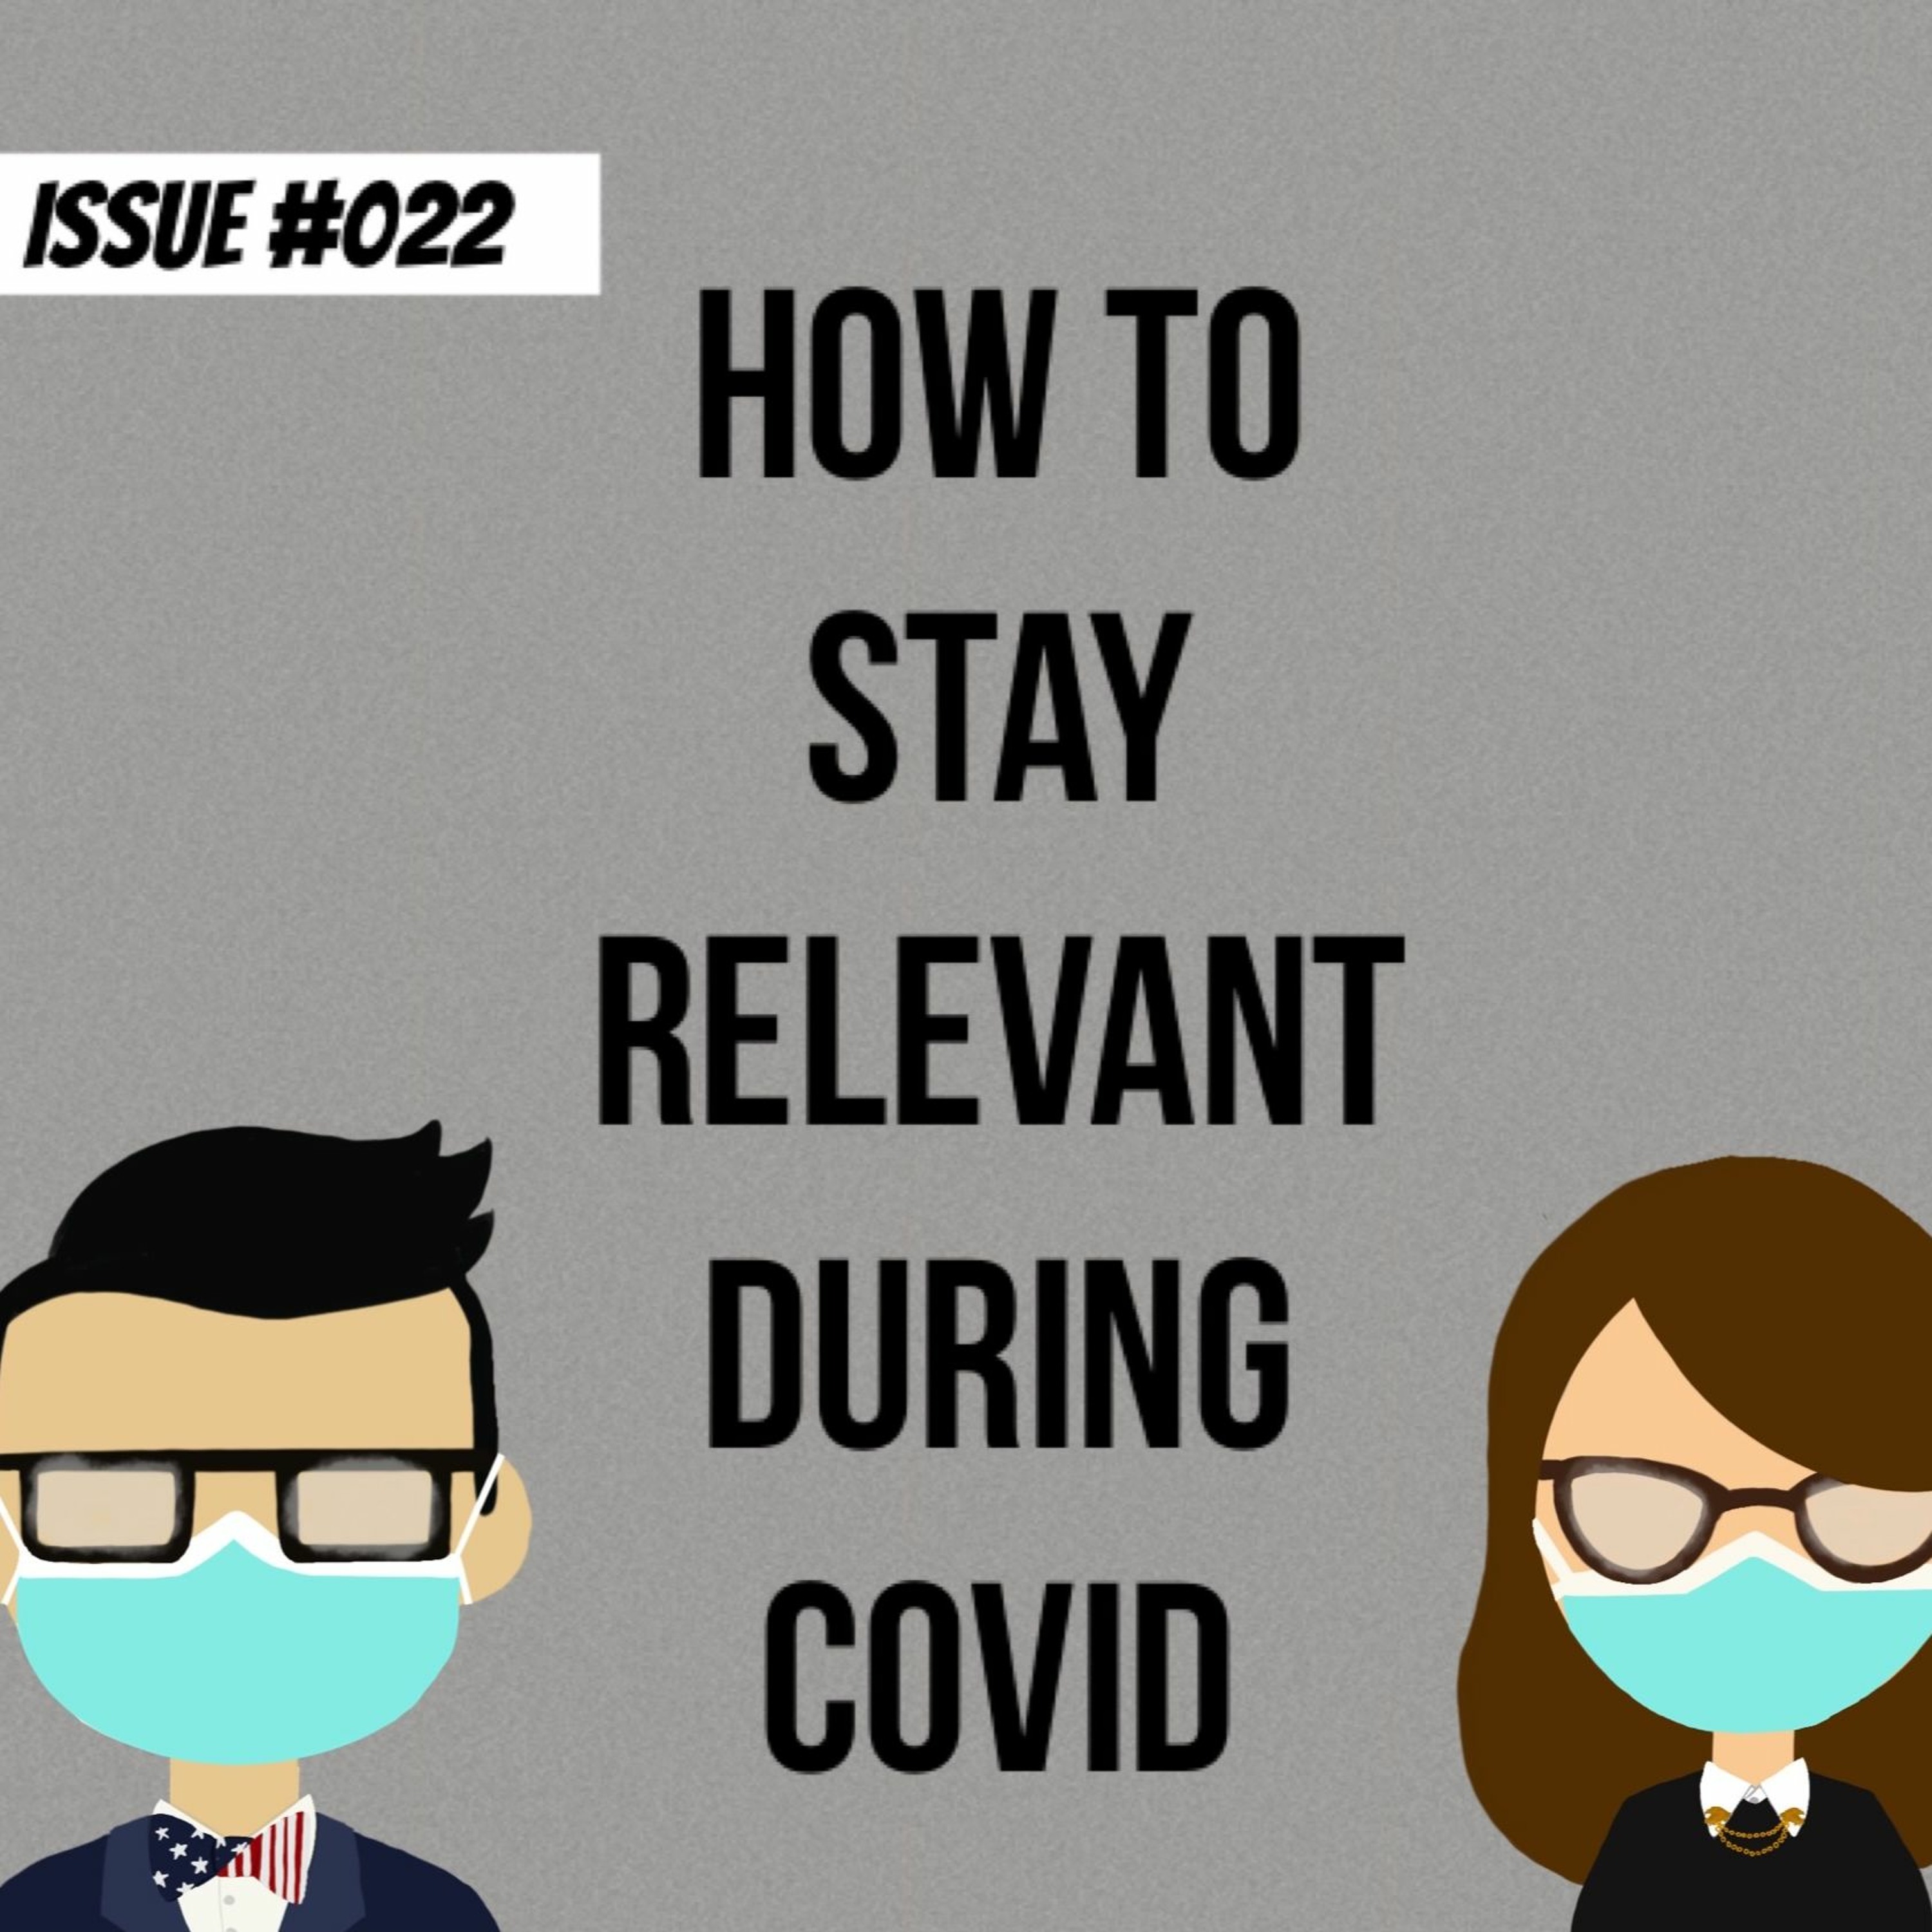 How To Stay Relevant During COVID